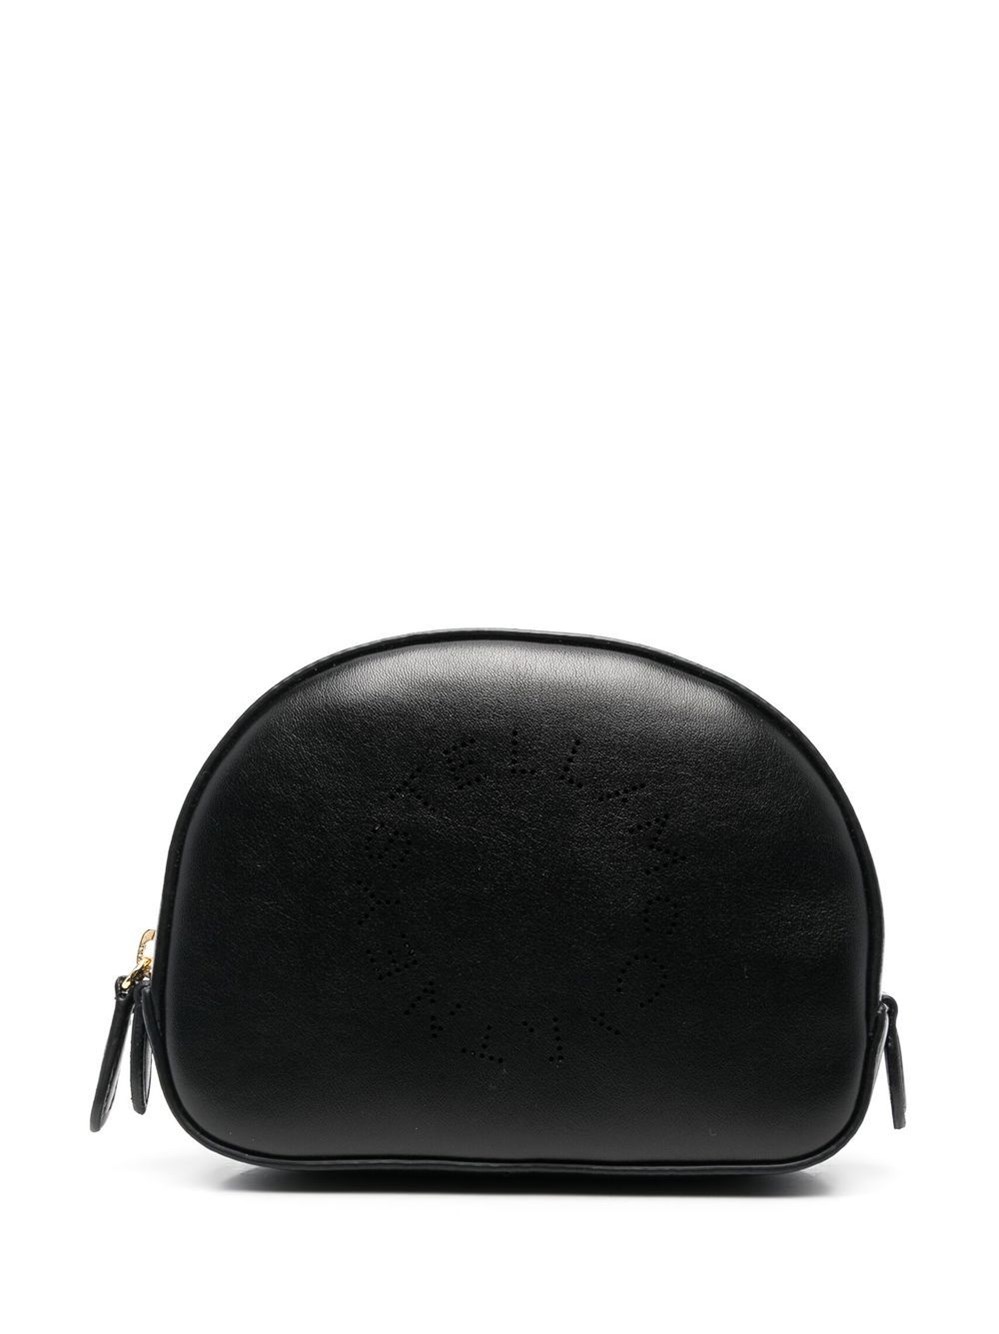 Stella Mccartney Make-up Bag With Perforated Logo In Black